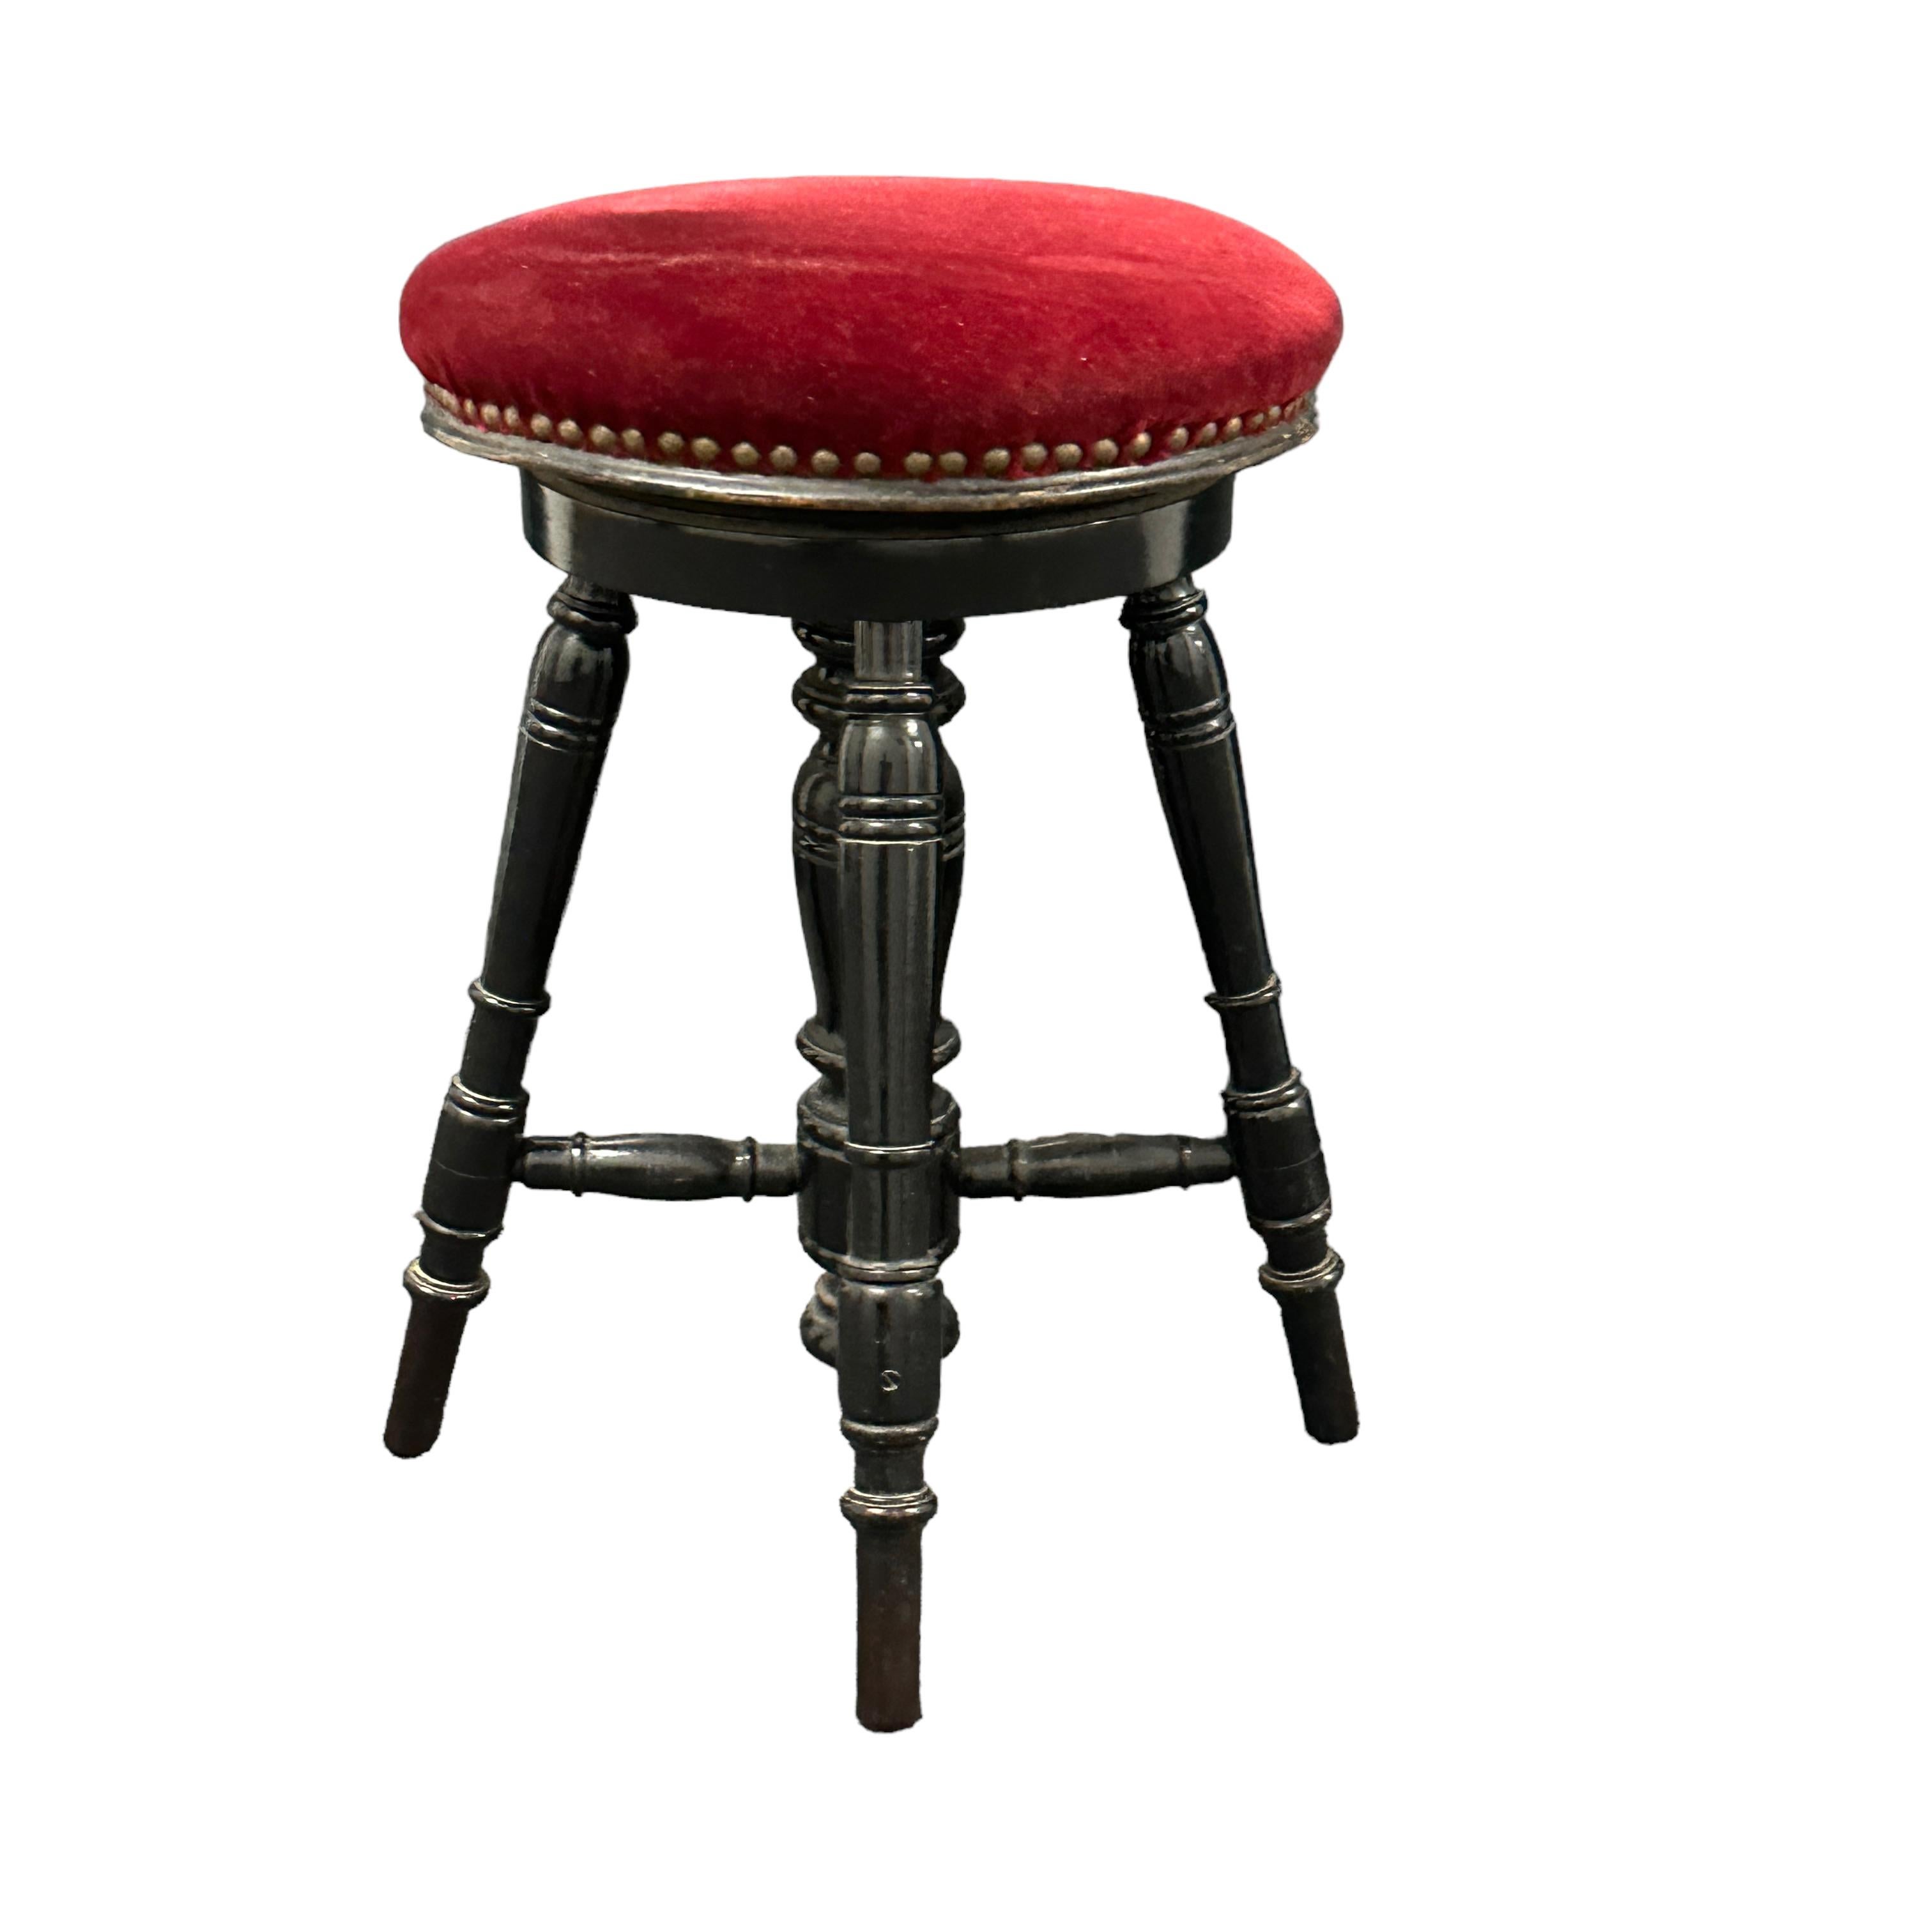 Early 20th Century Swivel Piano Stool with Red Velvet Seat, Belgium For Sale 4